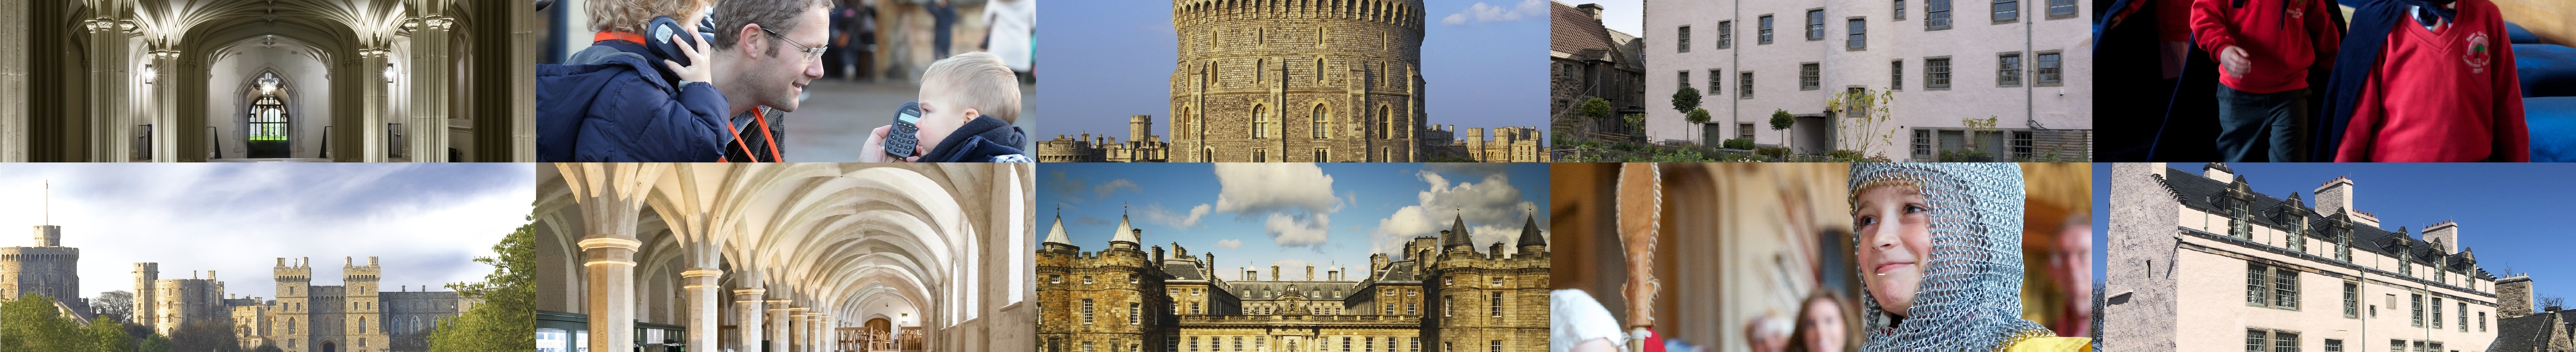 Windsor Castle and the Palace of Holyroodhouse